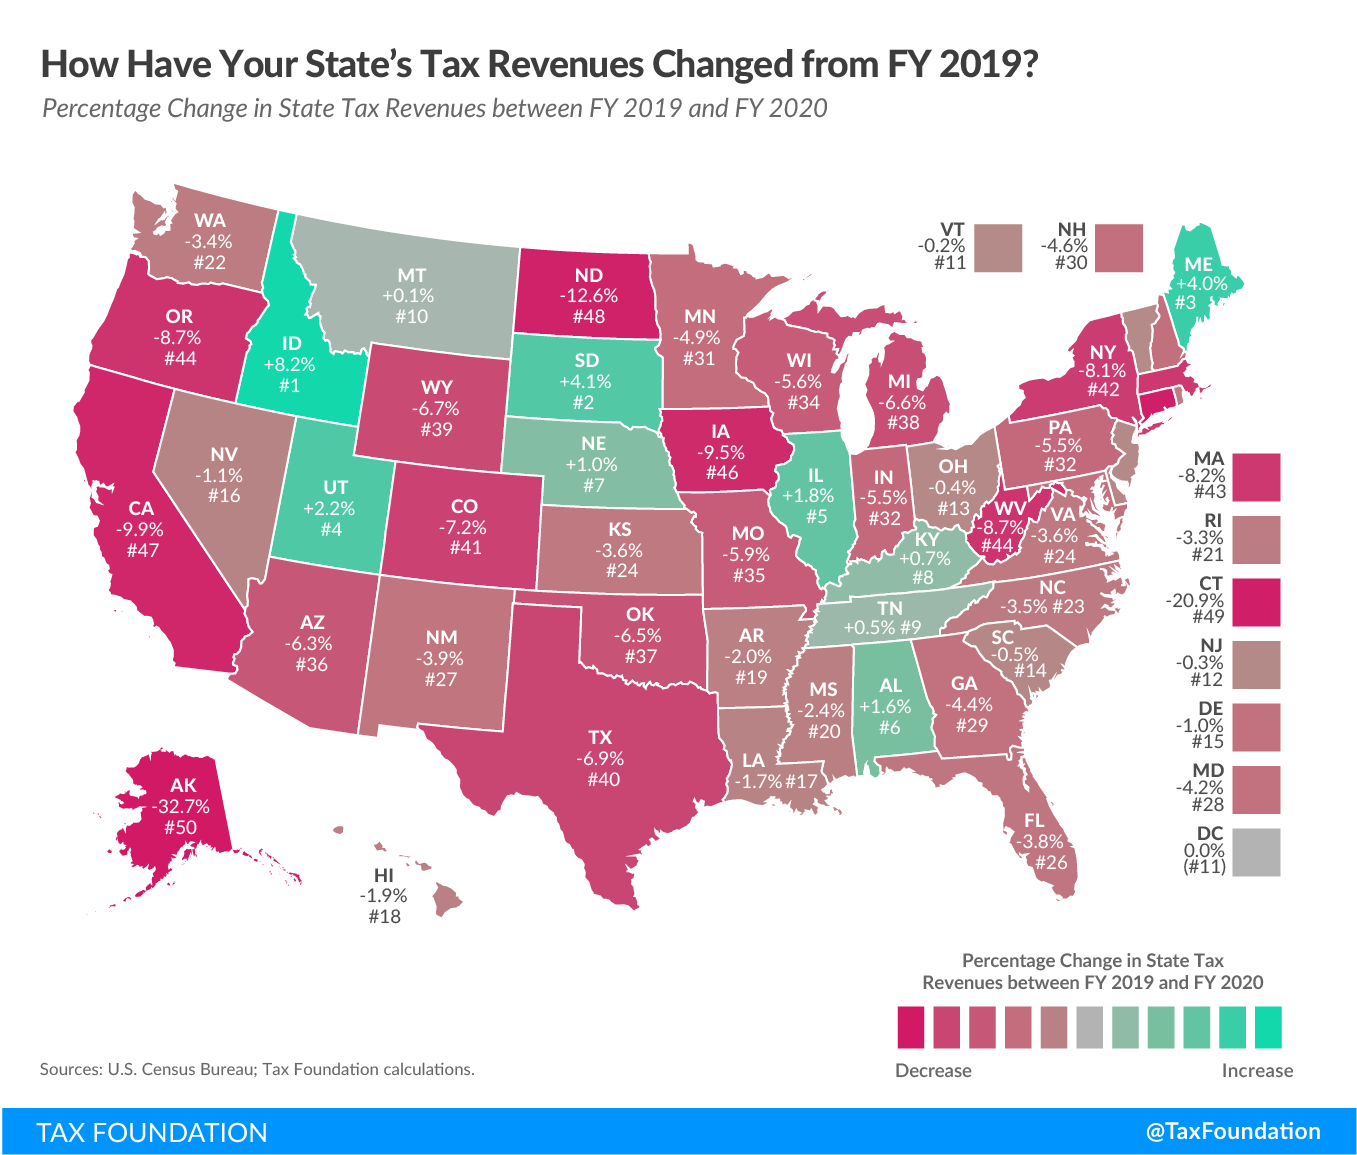 How have your state's tax revenues changed in FY 2020 compared to FY 2019? State revenue collections beat state revenue expectations in FY 2020 despite coronavirus pandemic and economic downturn